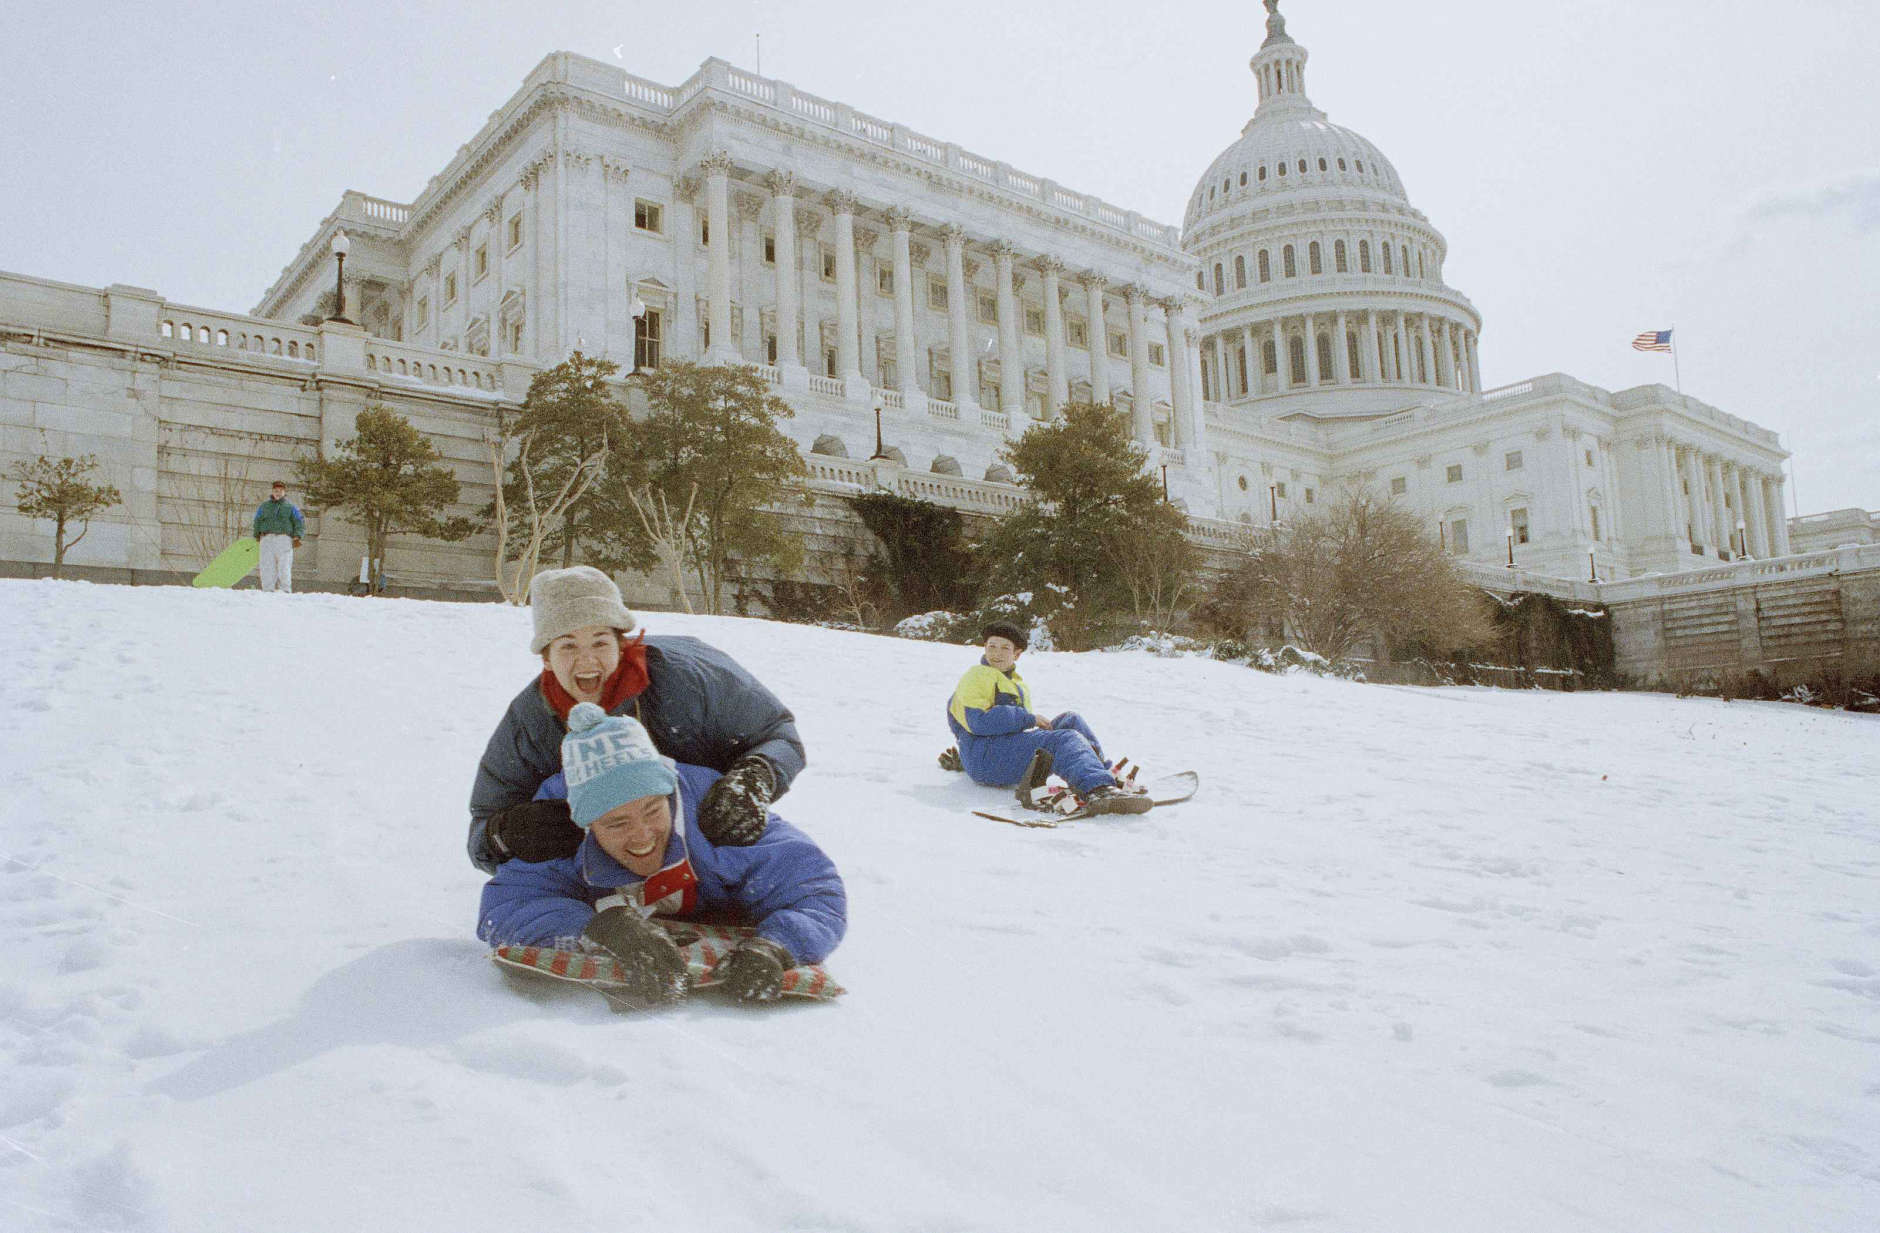 Allen and Lauren Haywood, top, both of Washington, slide down the snow-covered grounds of he Capitol, March 14, 1993. At right is Aubrey Parsons of Washington. A severe winter storm dumped nearly a foot of snow in the nation's capital over the weekend. (AP Photo/Mark Wilson)